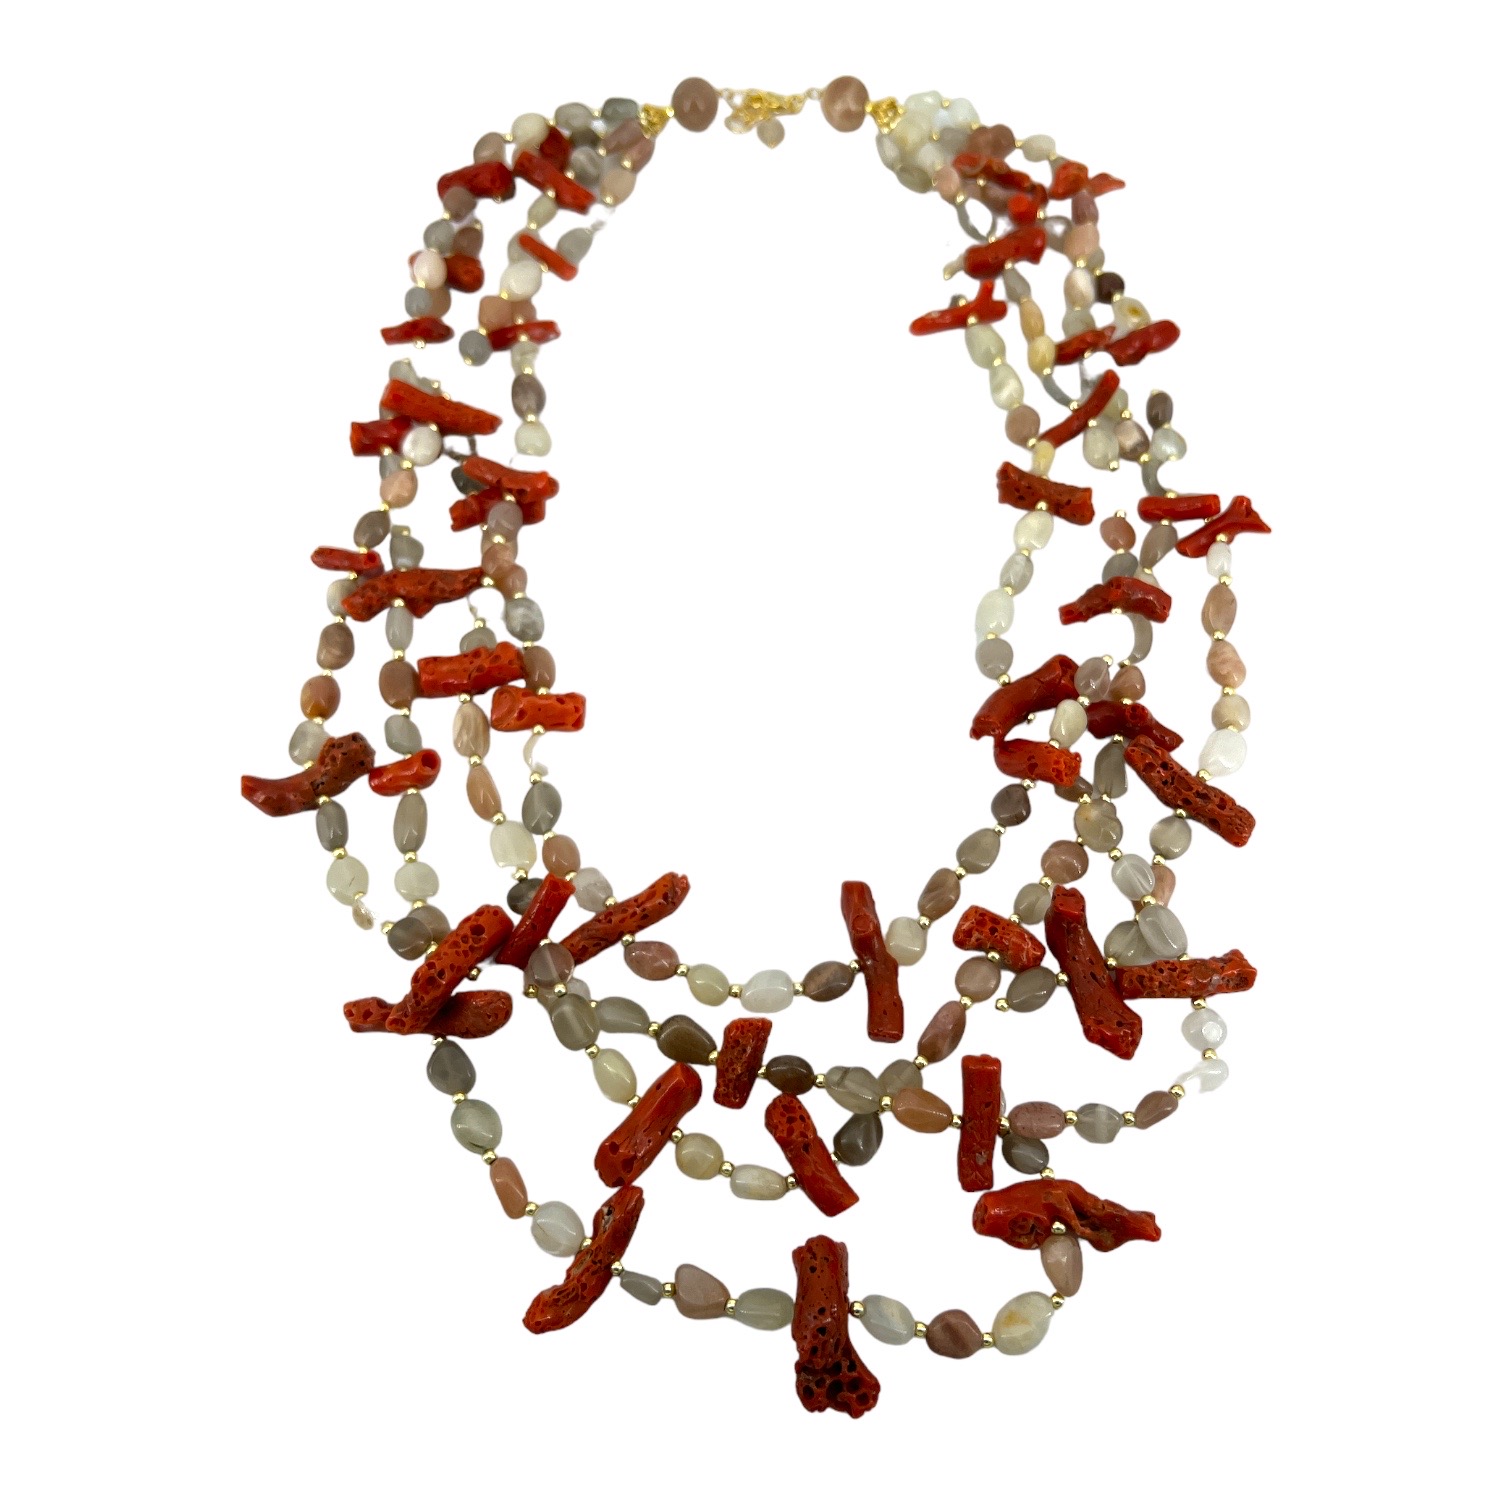 Coral and Hard Stone Necklace Art. 899CO